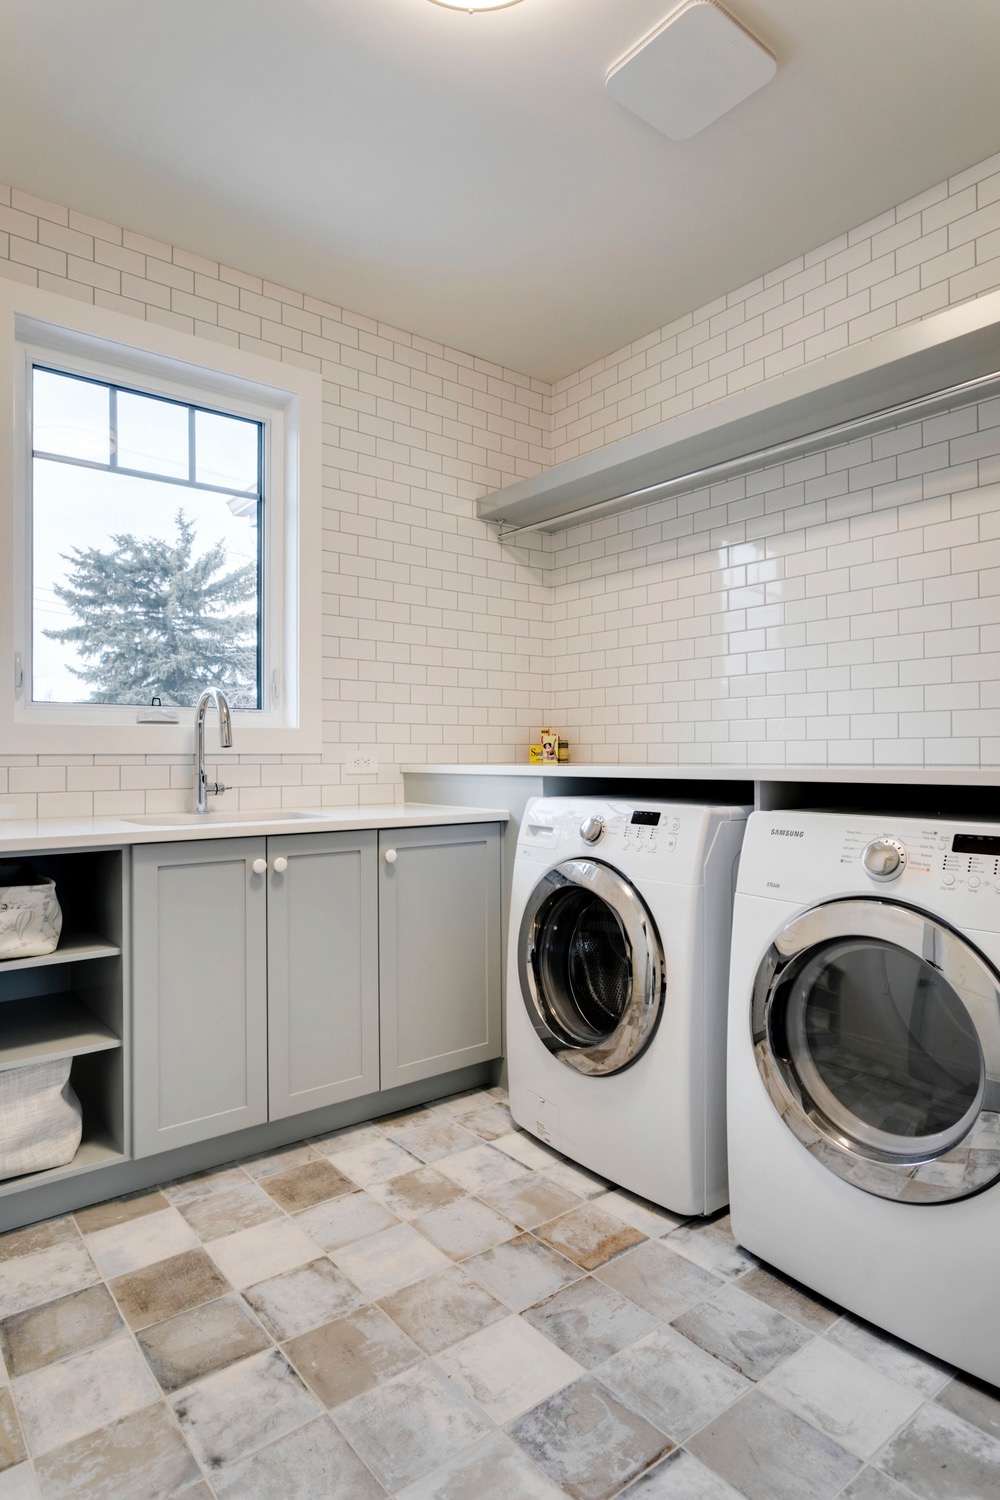 A laundry room with plenty of counterspace.